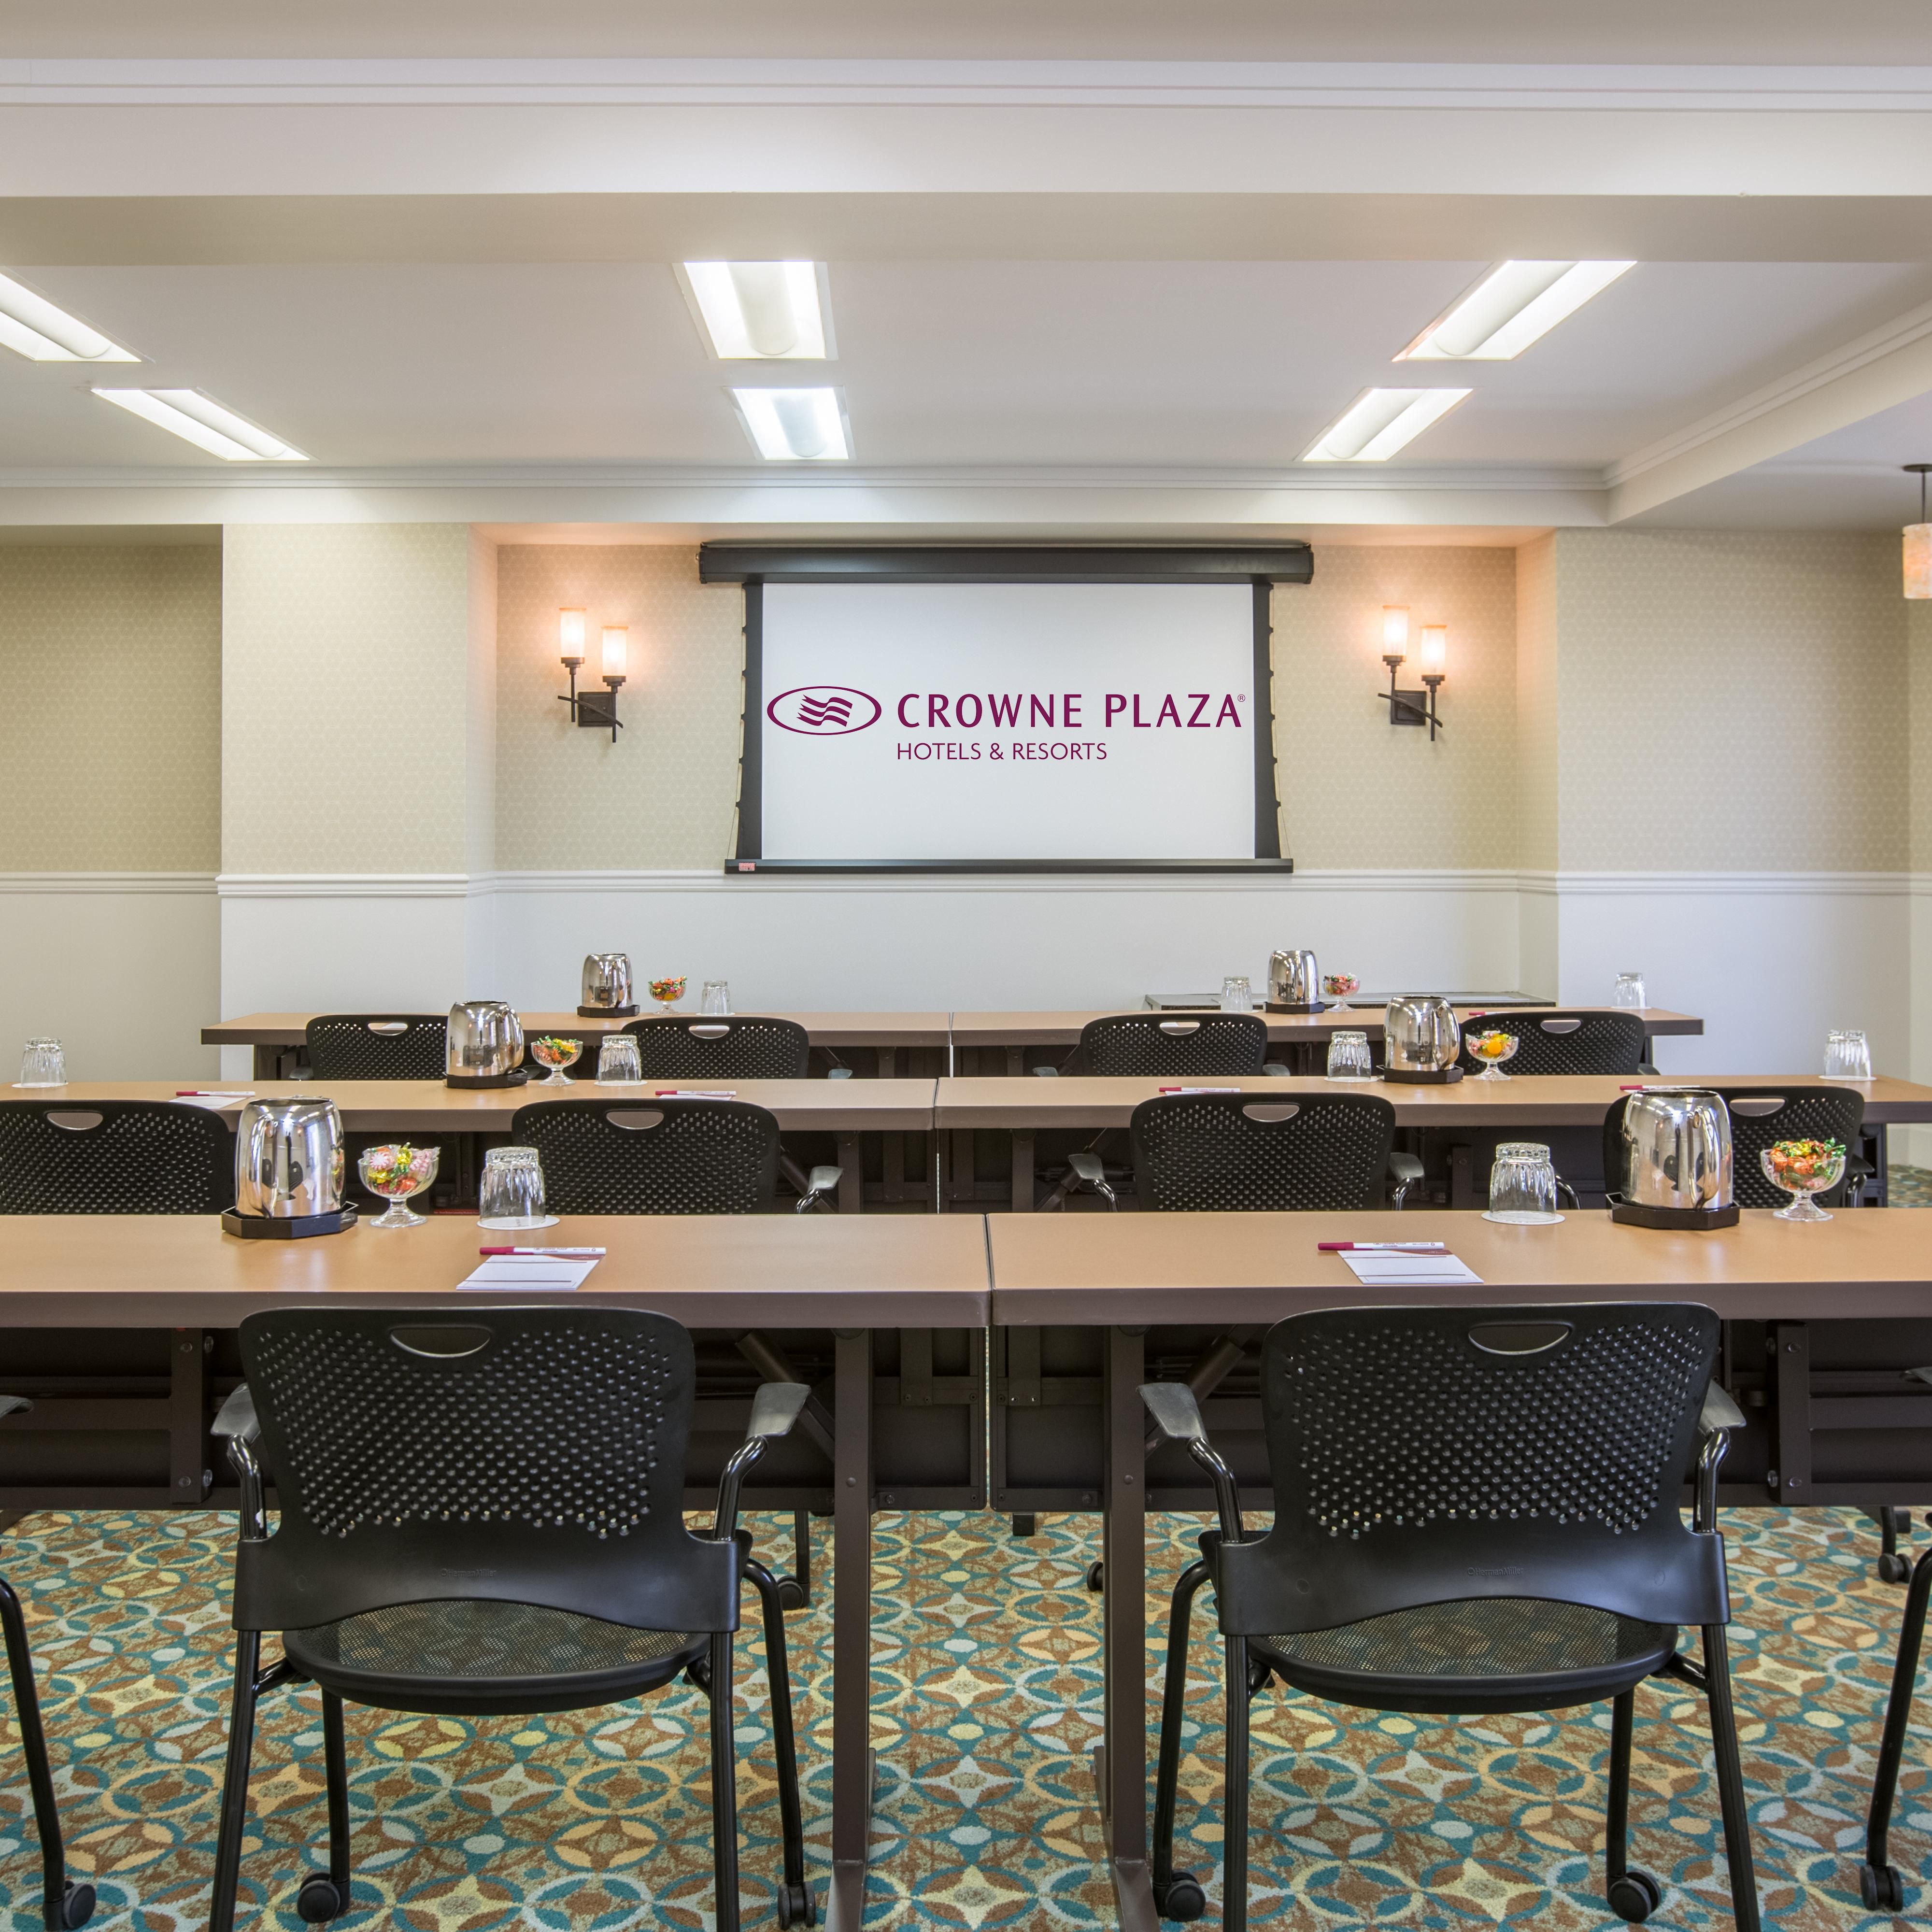 Classroom style is perfect for your next big conference.